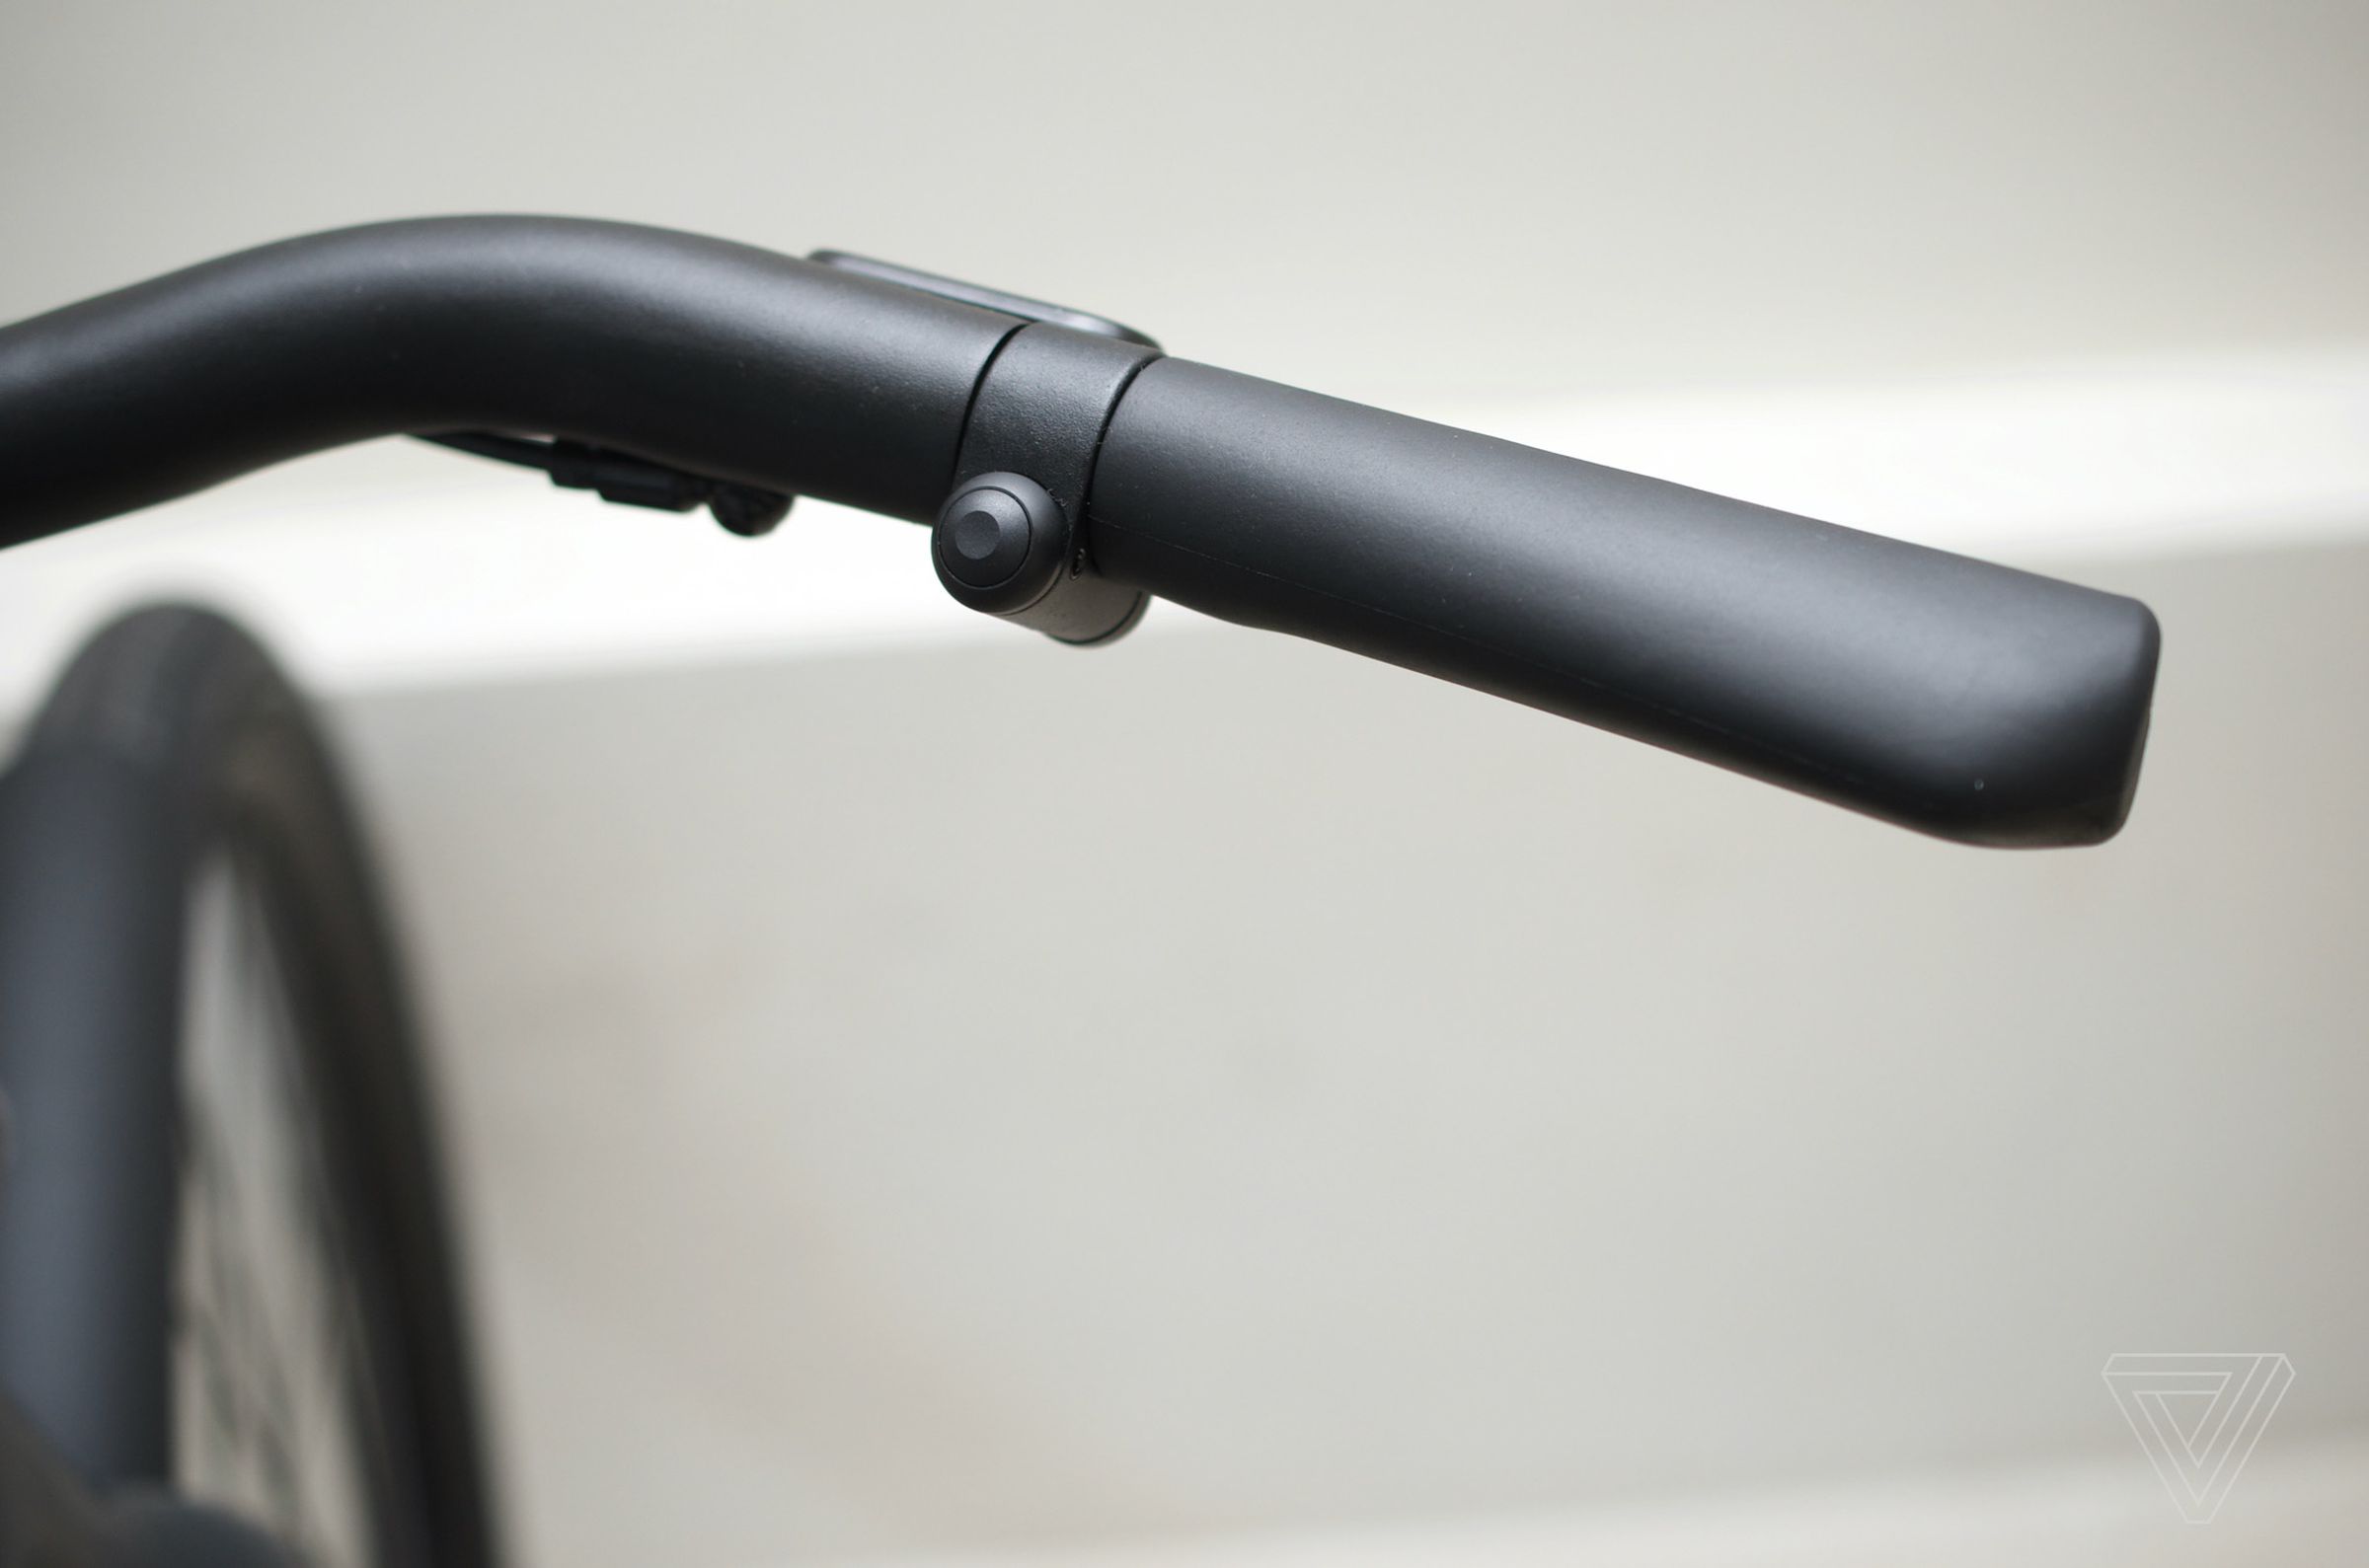 The turbo boost button on the VanMoof S3.